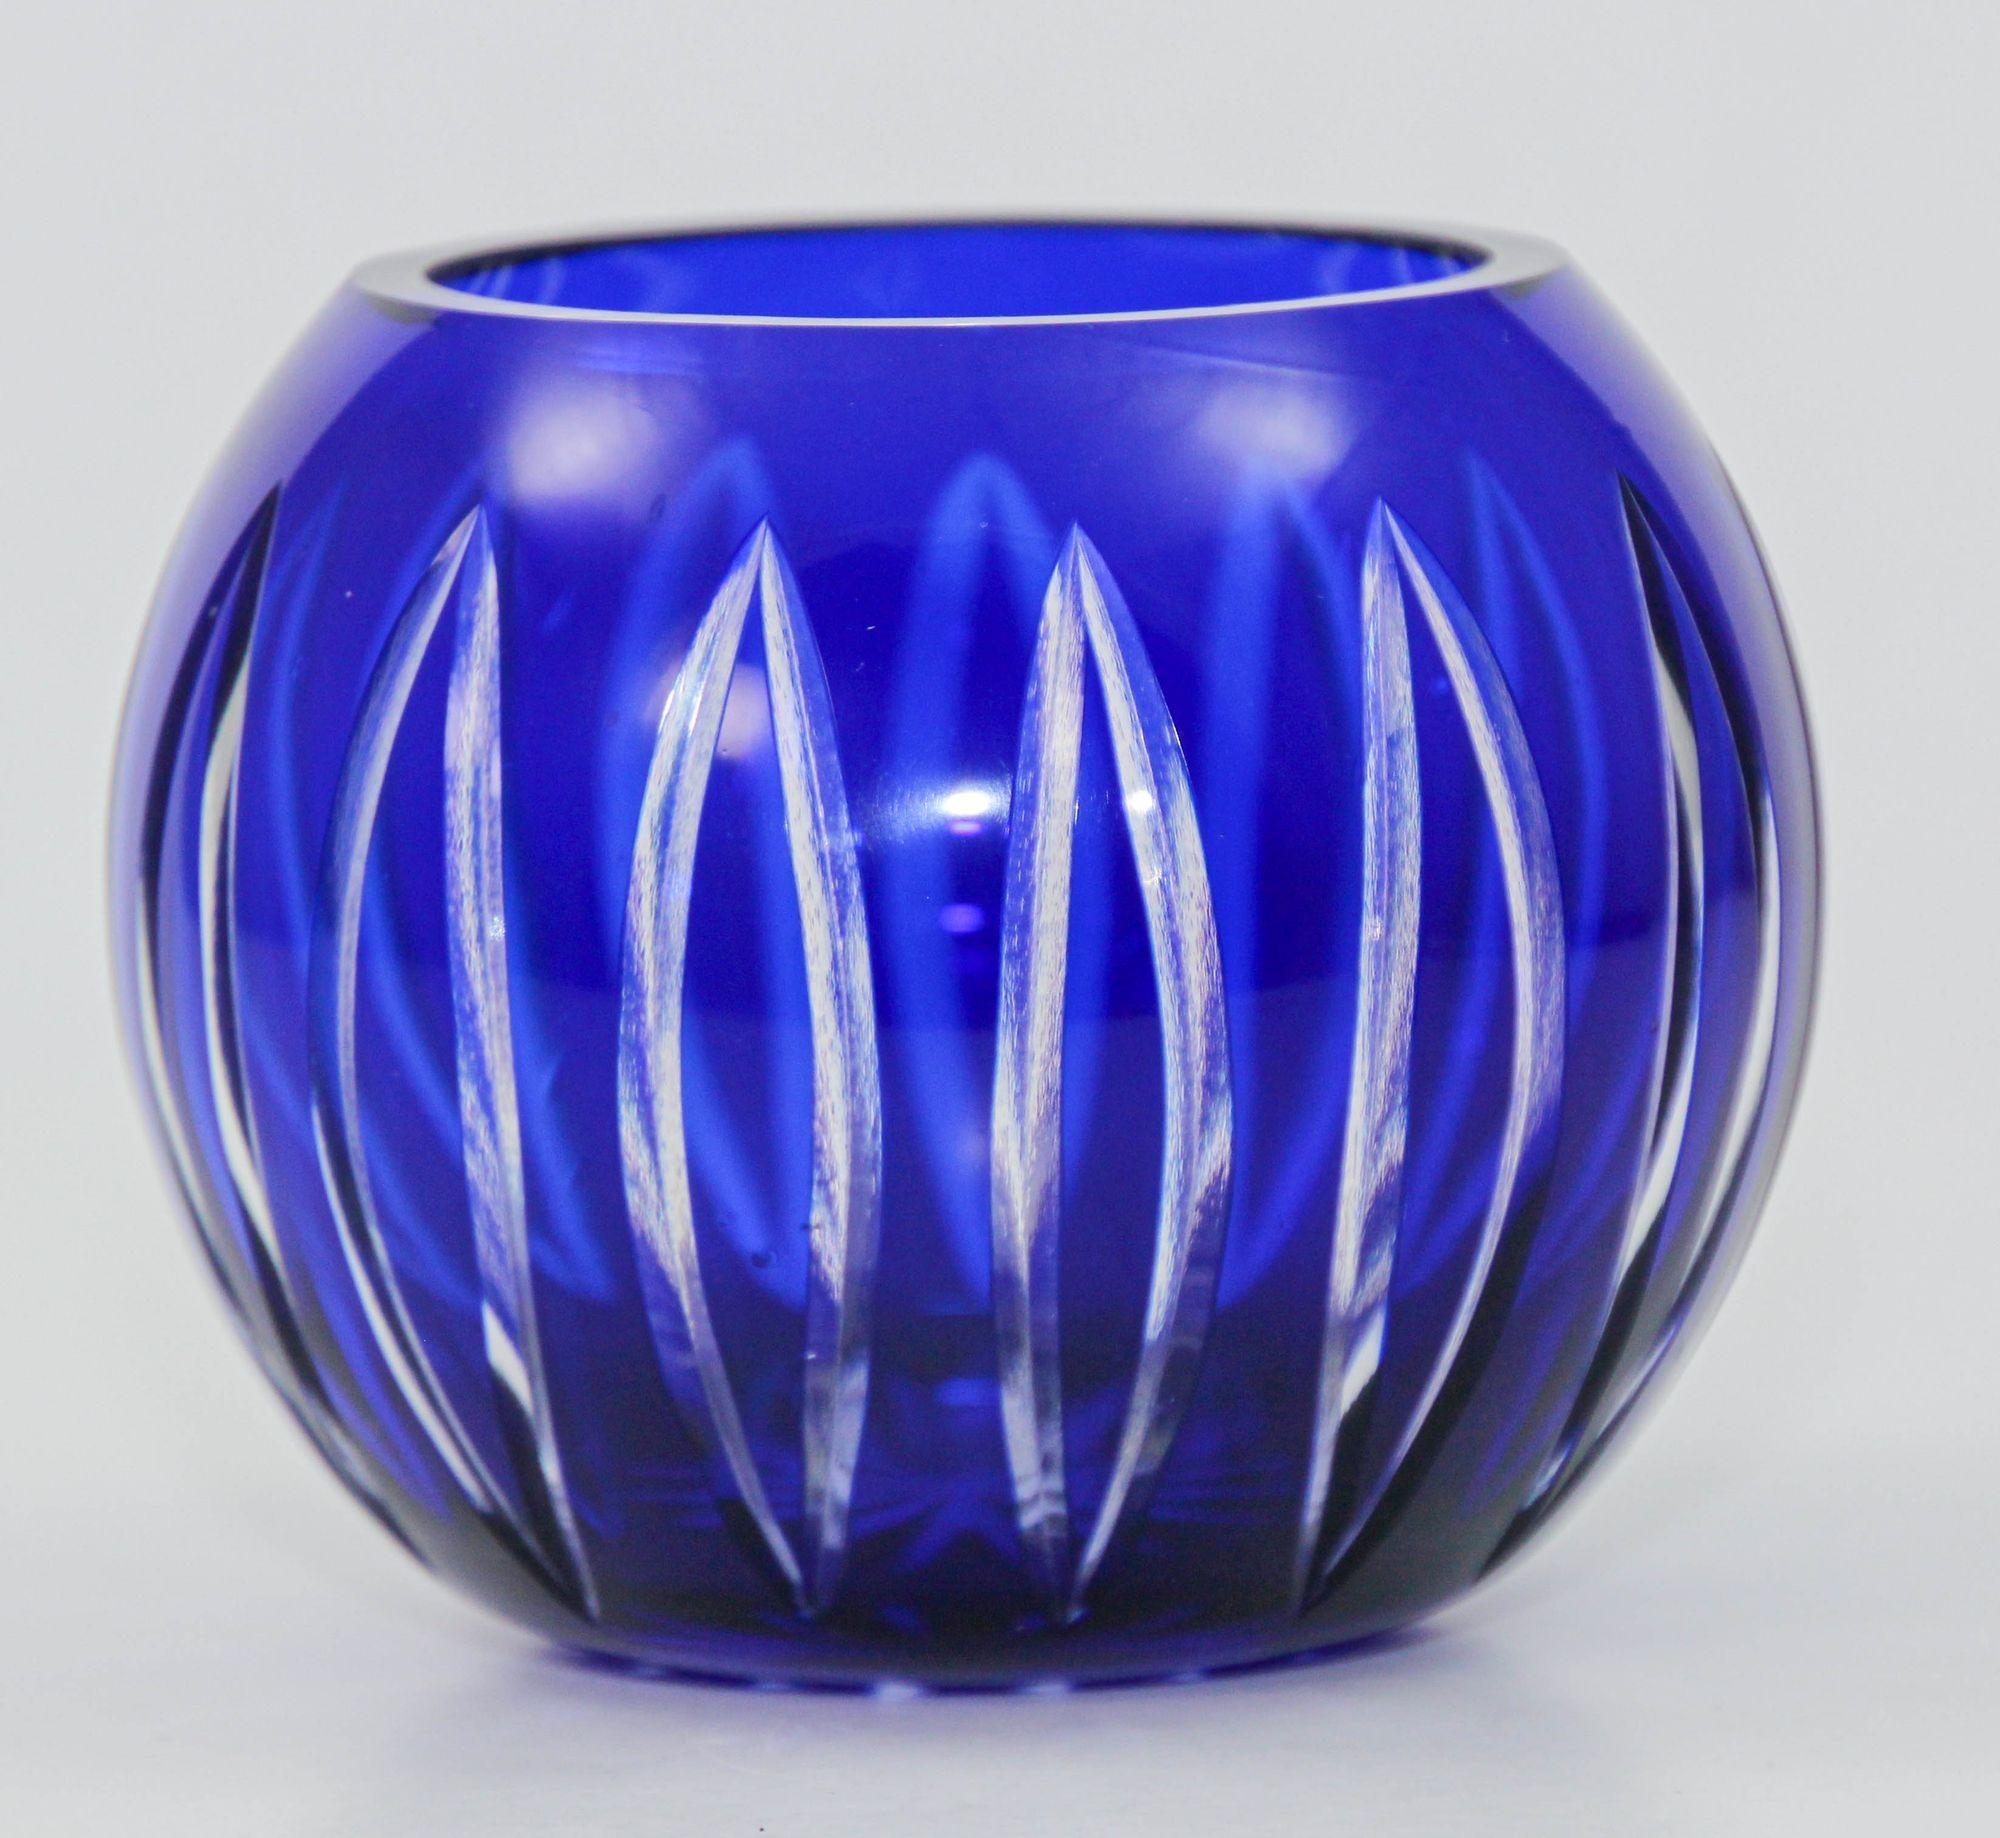 Cobalt blue cut to clear Bohemia art glass crystal rose vase, decorative bowl or candle holder.
A beautiful bowl with cut details from top to bottom, cut to clear, cobalt blue Bohemian glass vase from Czechoslovakia.
Vintage cobalt blue Bohemian art